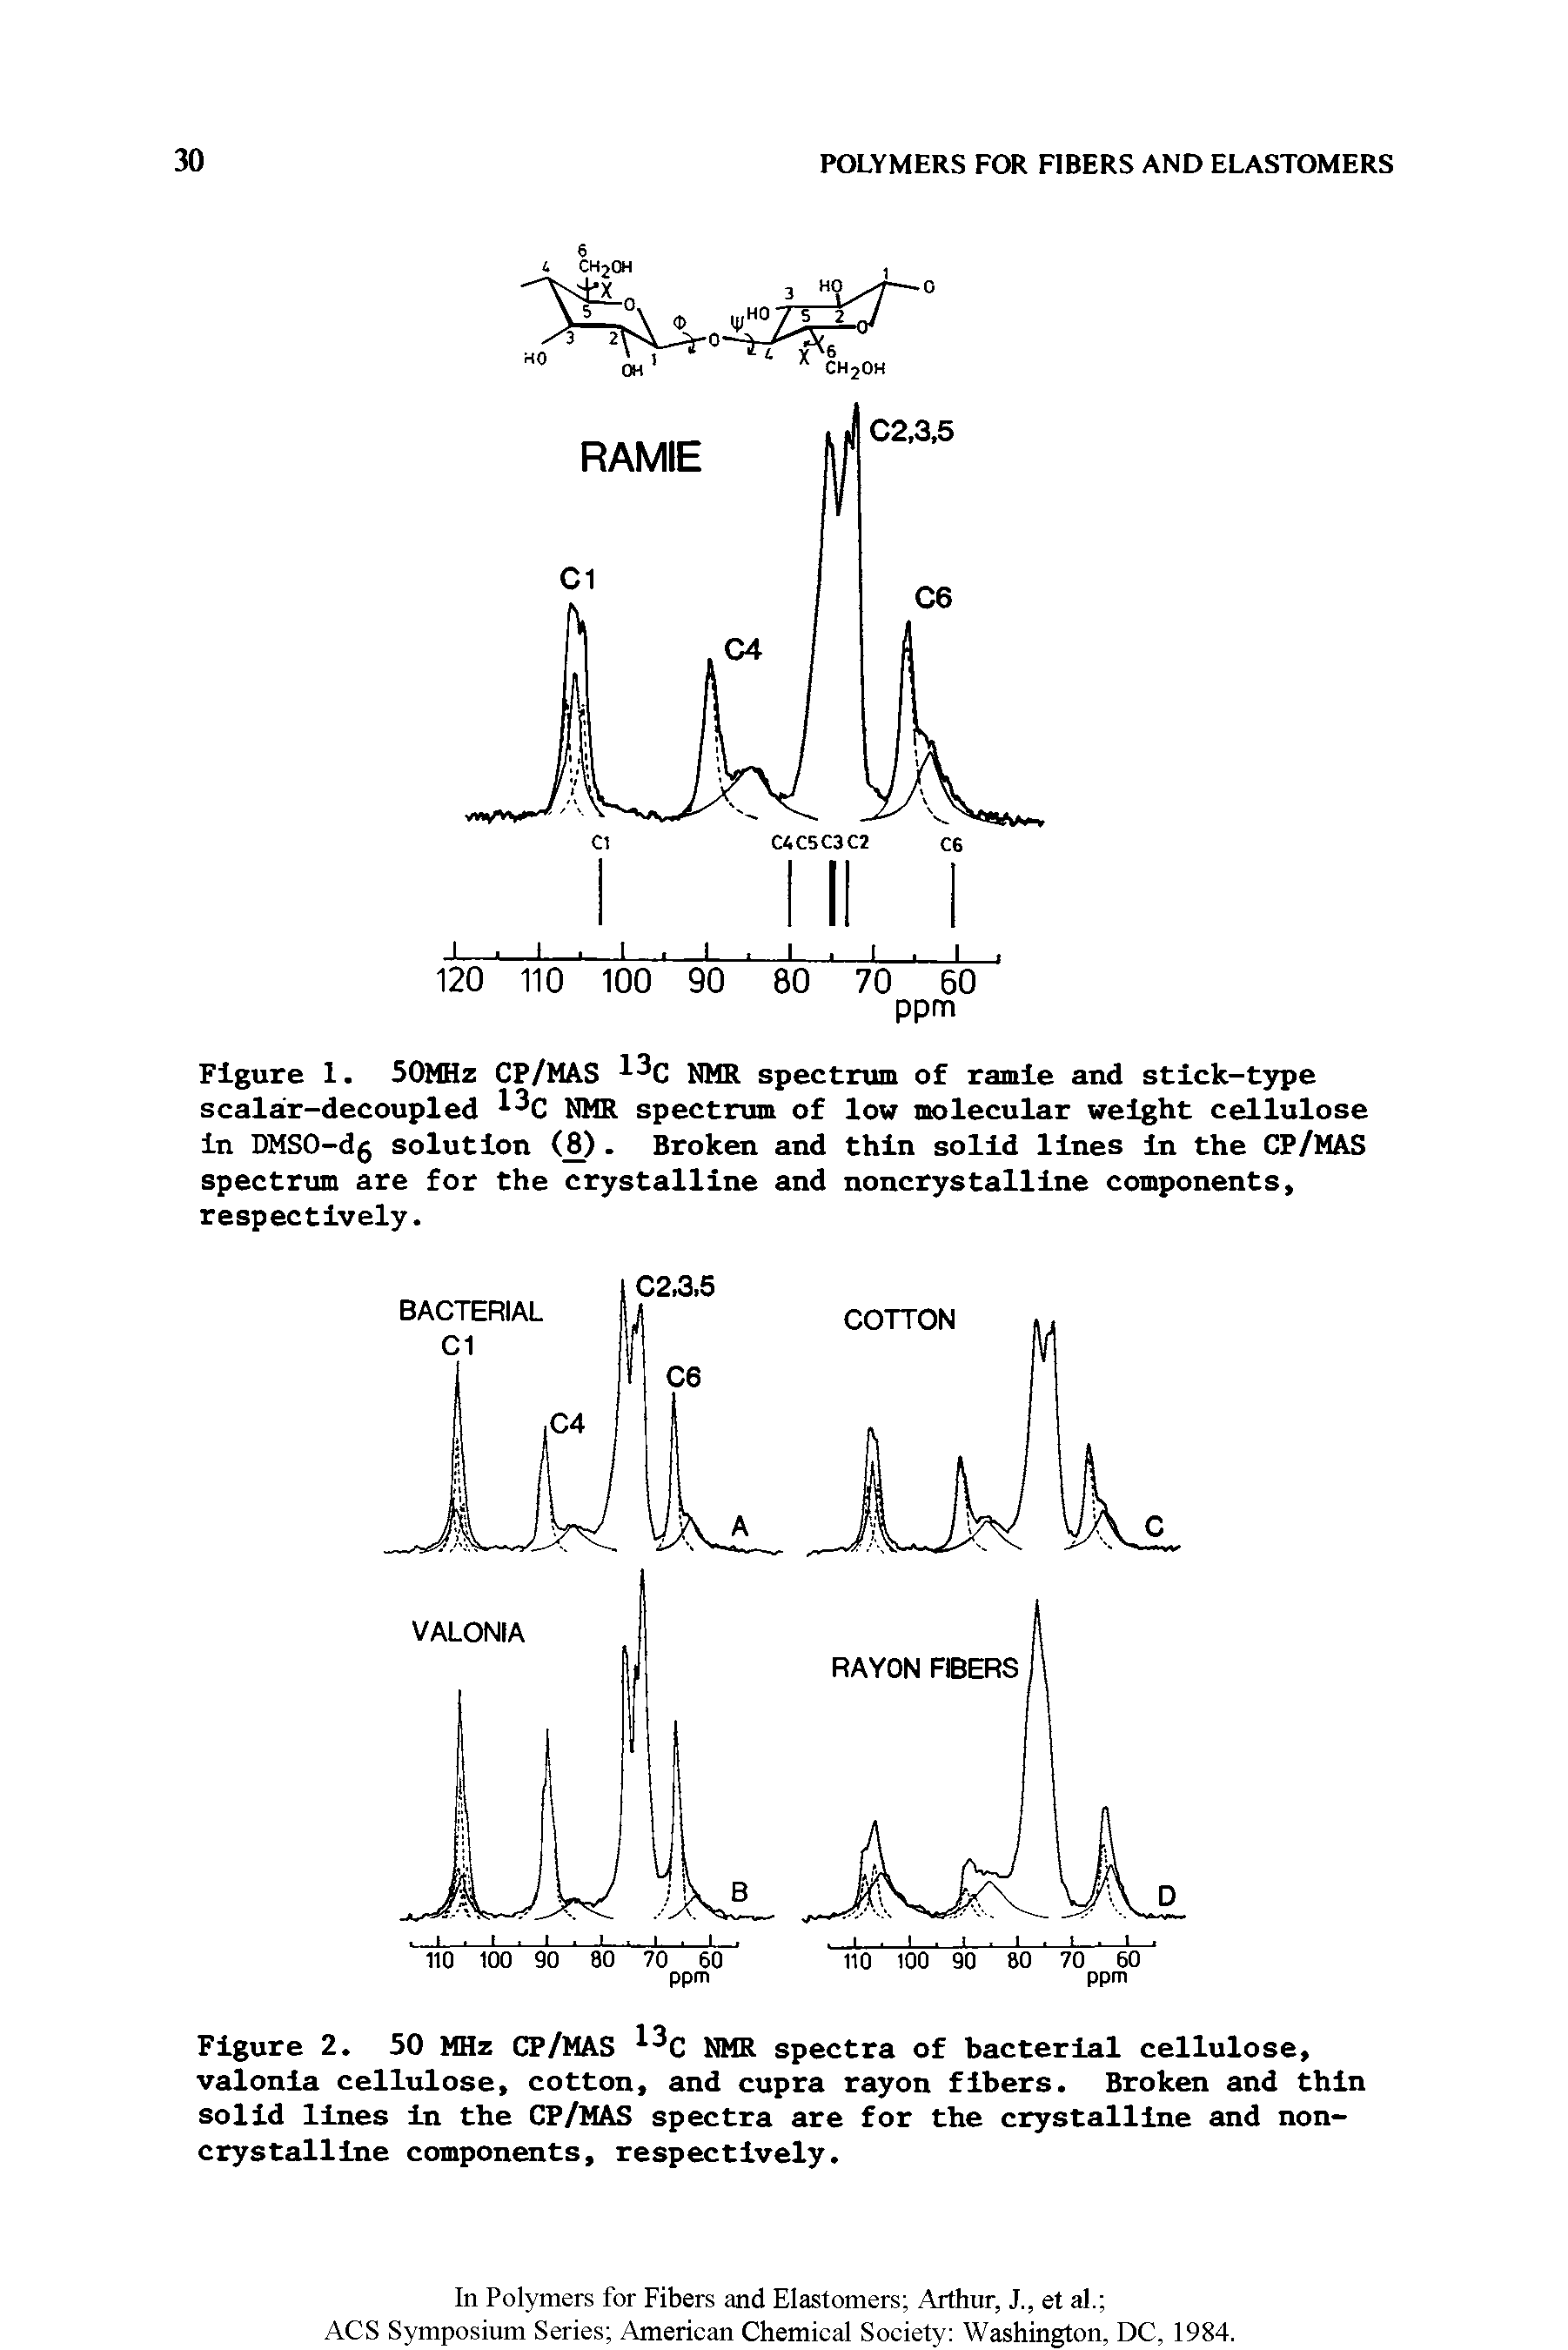 Figure 1. 50MHz CP/MAS HMR spectrum of ramie and stick-type scalar-decoupled HMR spectrum of low molecular weight cellulose In DMS0-d5 solution (.8). Broken and thin solid lines In the CP/MAS spectrum are for the crystalline and noncrystalllne components, respectively.